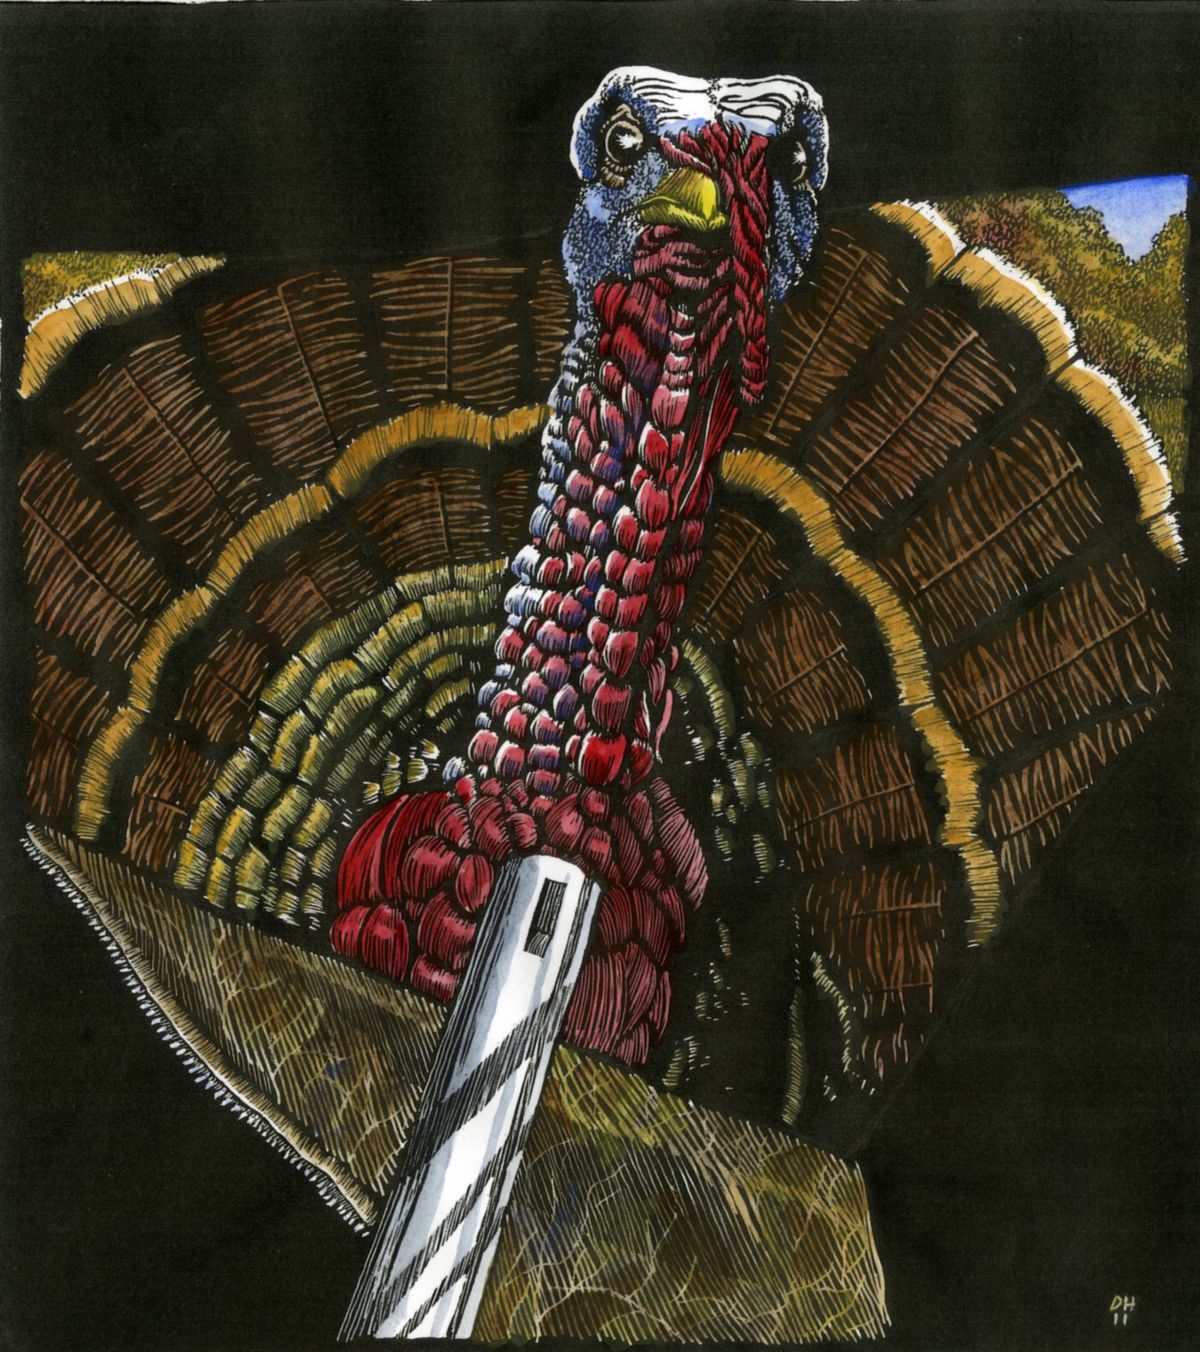 Outdoor writing contest illustration by Dale Hamilton for the 2011 winning story, "Frozen Turkey" by Kyle Hansen of West Valley High School. (Illustration by Dale Hamilton)